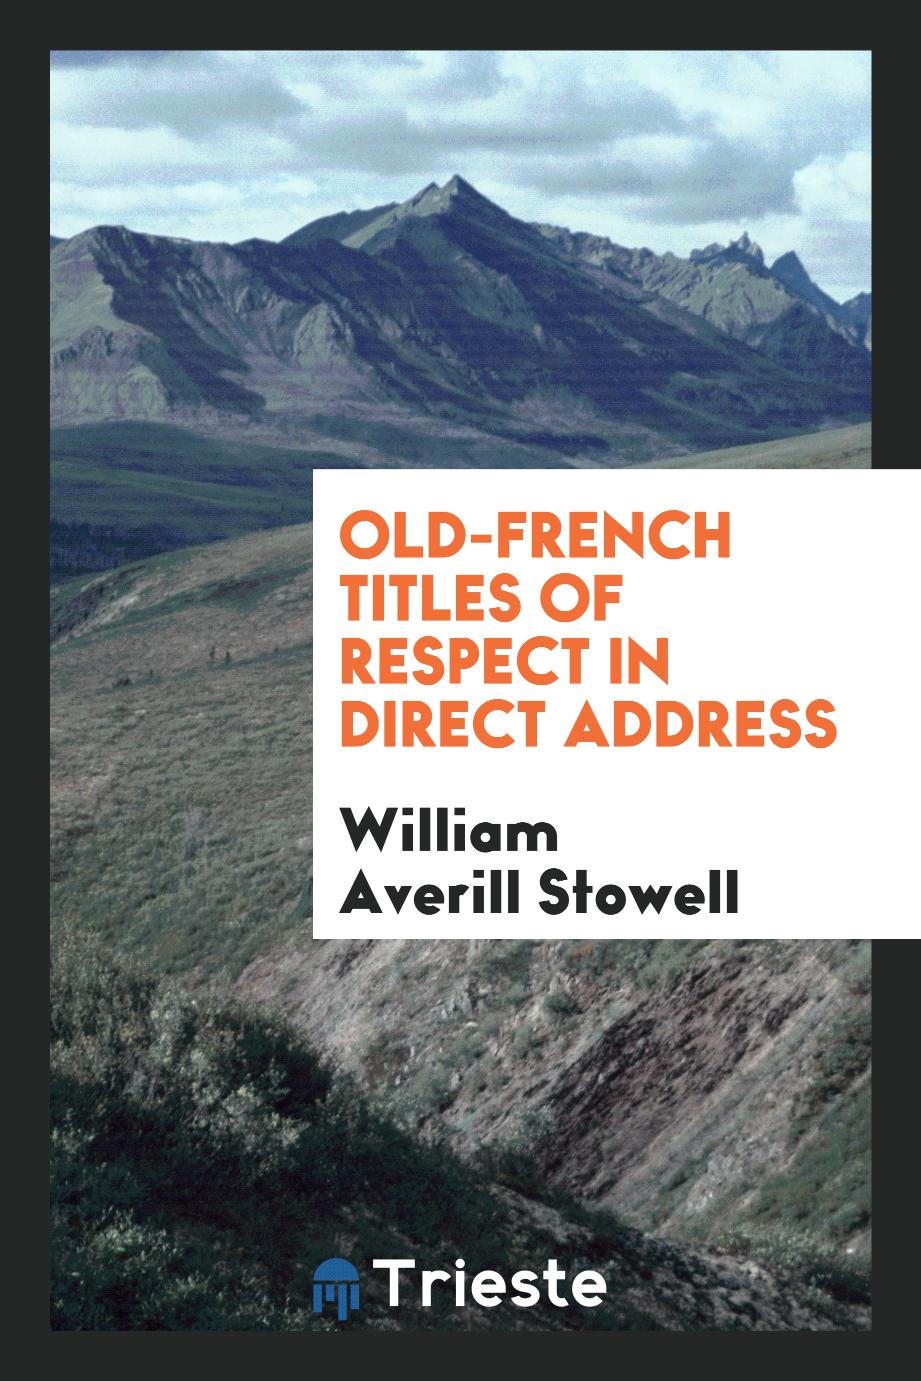 Old-French titles of respect in direct address